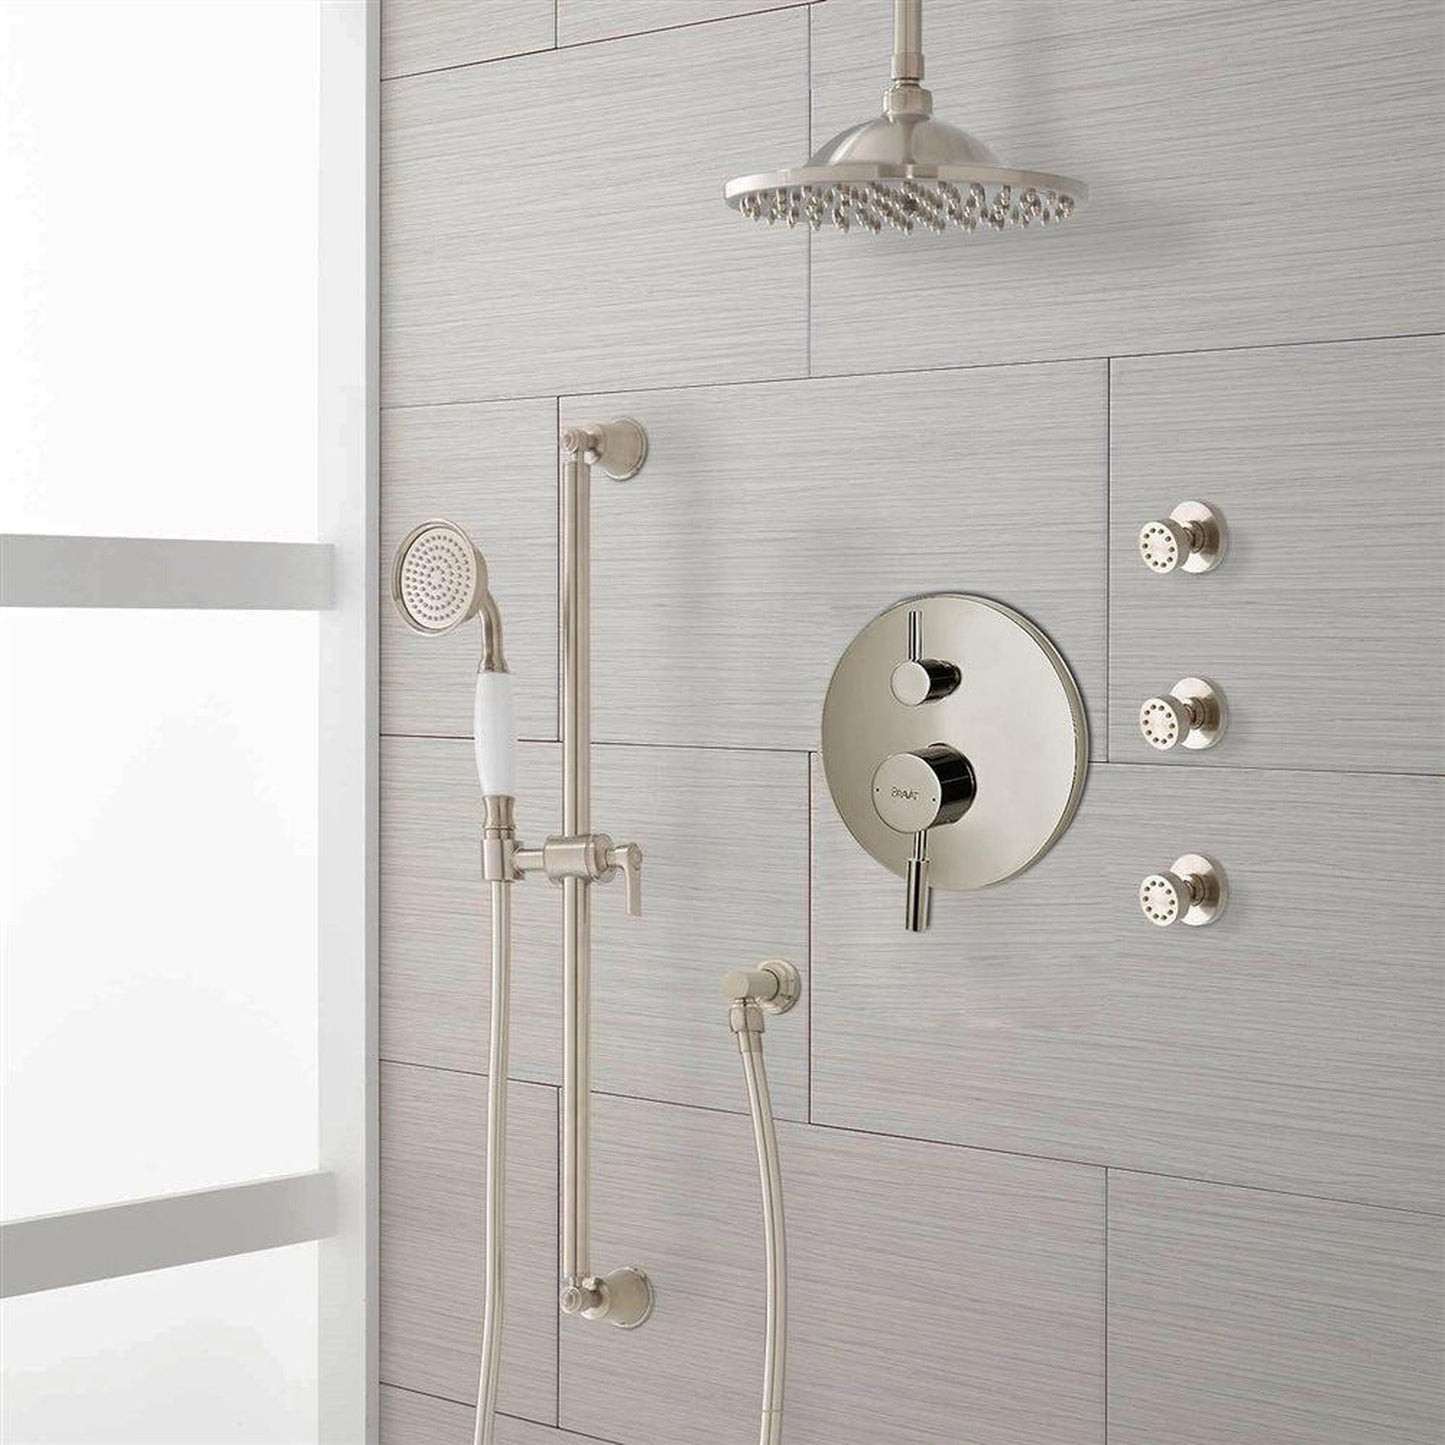 FontanaShowers Deluxe Designers 16" Brushed Nickel Round Dual Shower Head Rainfall Shower System With 3-Jet Body Sprays and Hand Shower